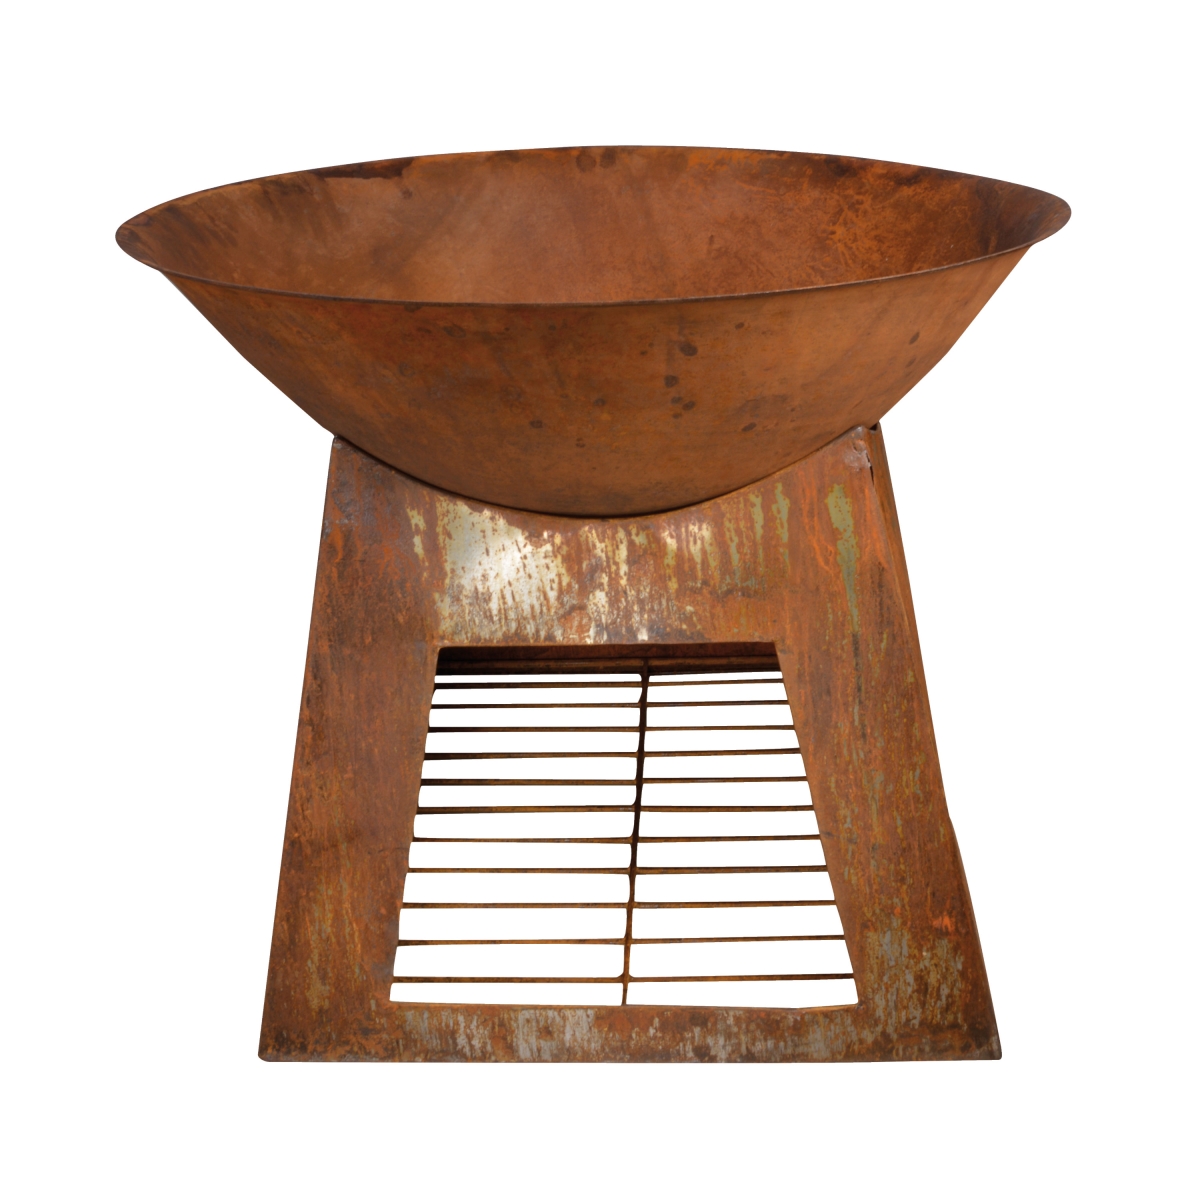 Ff169 Fire Bowl With Wood Storage, Rust Metal - Small